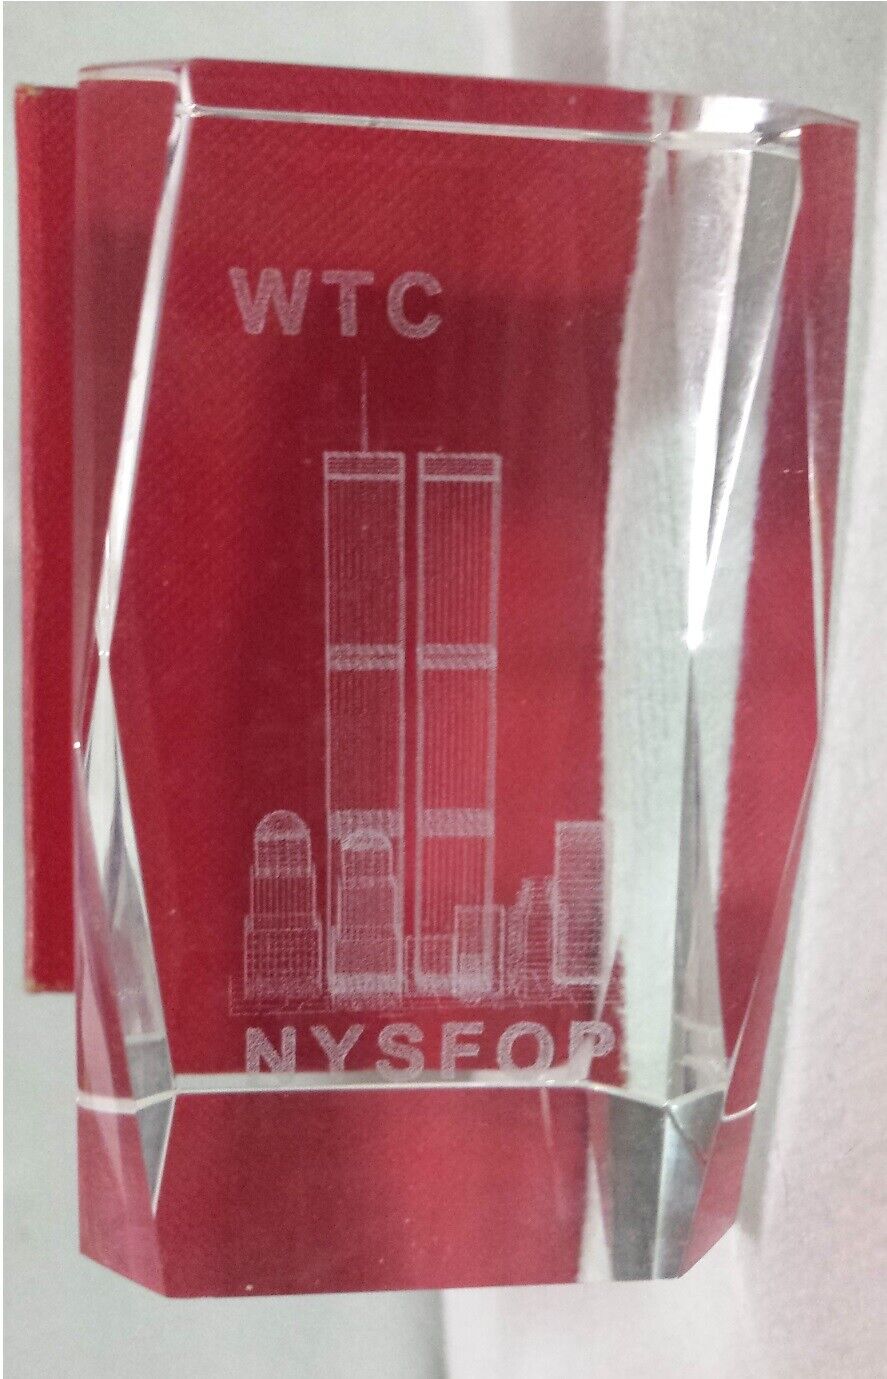 WTC Skyline NYSFOP Clear Crystal Cube Only [For Light Display] Trade Center